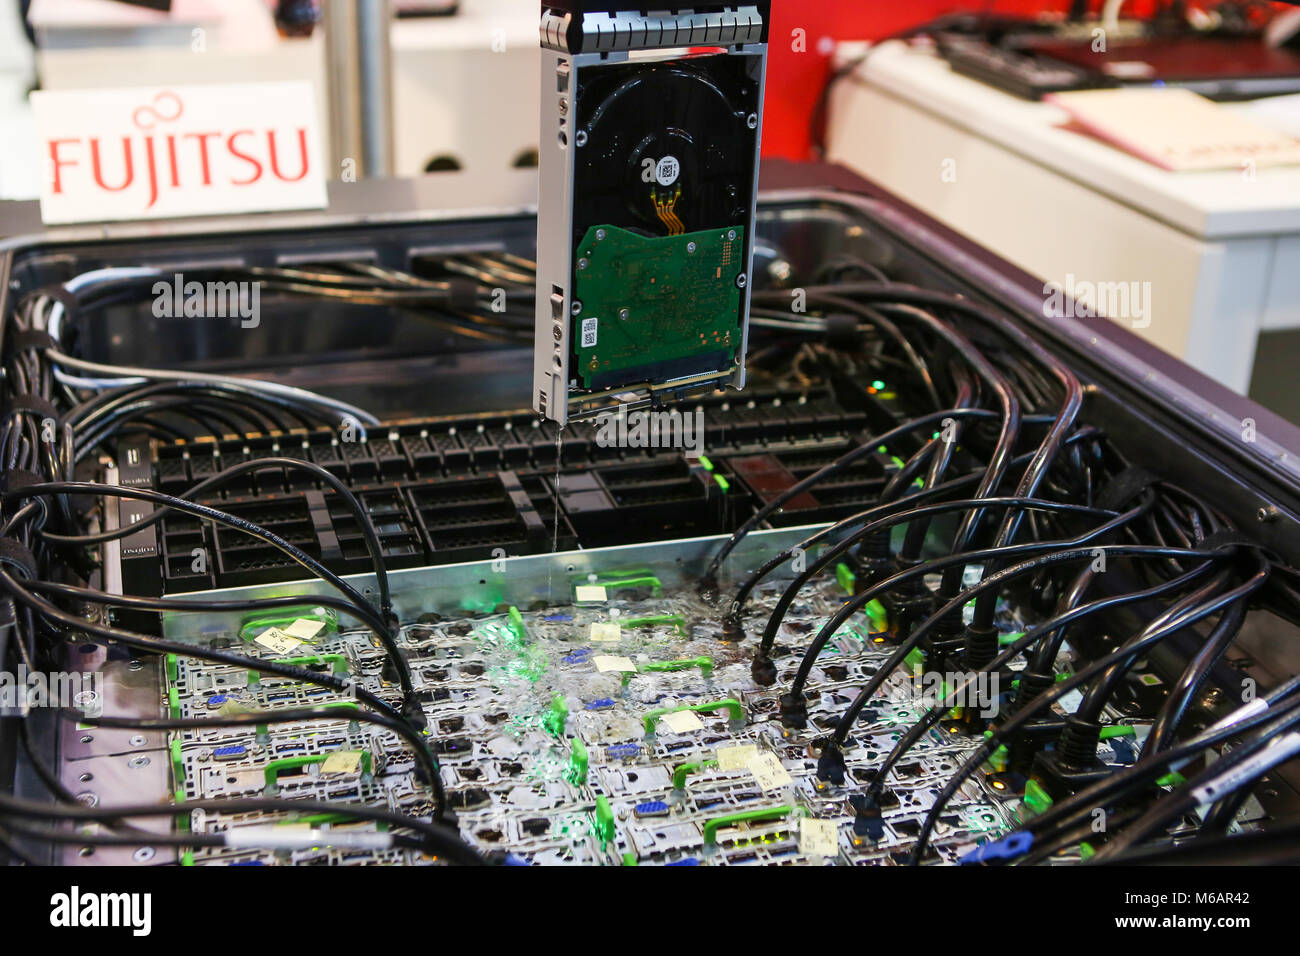 Hanover, Germany. 19th March, 2017. CeBIT 2017, ICT trade fair: Fujitsu Liquid Immersion Cooling System for data center servers, at booth of Fujitsu. Immersing servers in a fluorocarbon-based inert fluid (here 3M Fluorinert) provides greater cooling performance, eliminates the need for server fans and reduces total cooling equipment power consumption. Credit: Christian Lademann Stock Photo